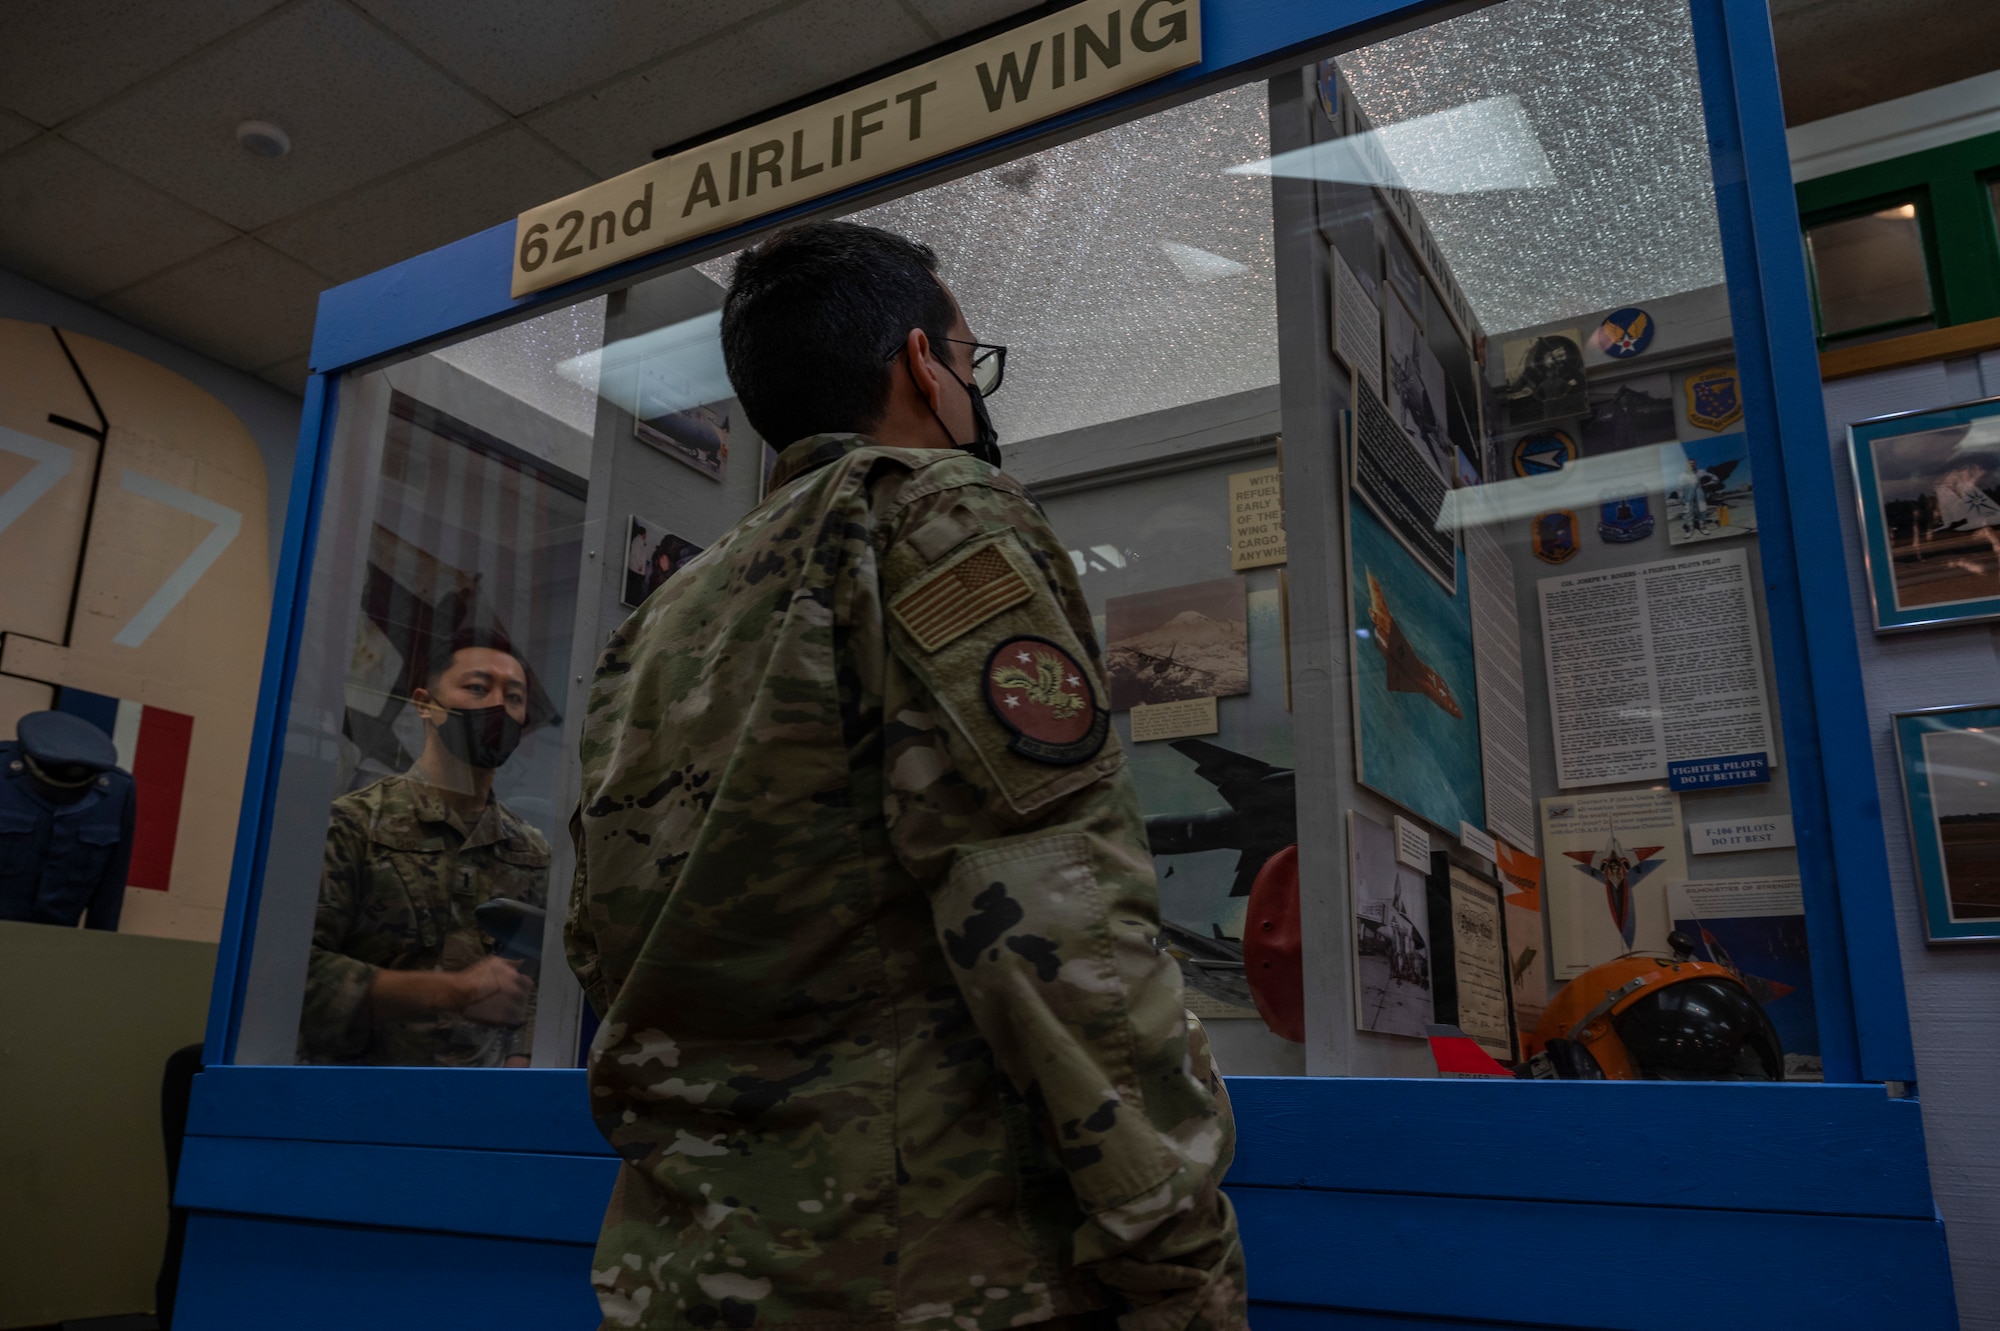 Airmen assigned to the 62nd Airlift Wing  look at a display case in the McChord Air Museum at Joint Base Lewis-McChord, Washington, Feb. 22, 2022. After being closed for almost two years due to the COVID-19 pandemic, the Air Museum reopened its doors to the public. (U.S. Air Force photo by Airman 1st Class Charles Casner)